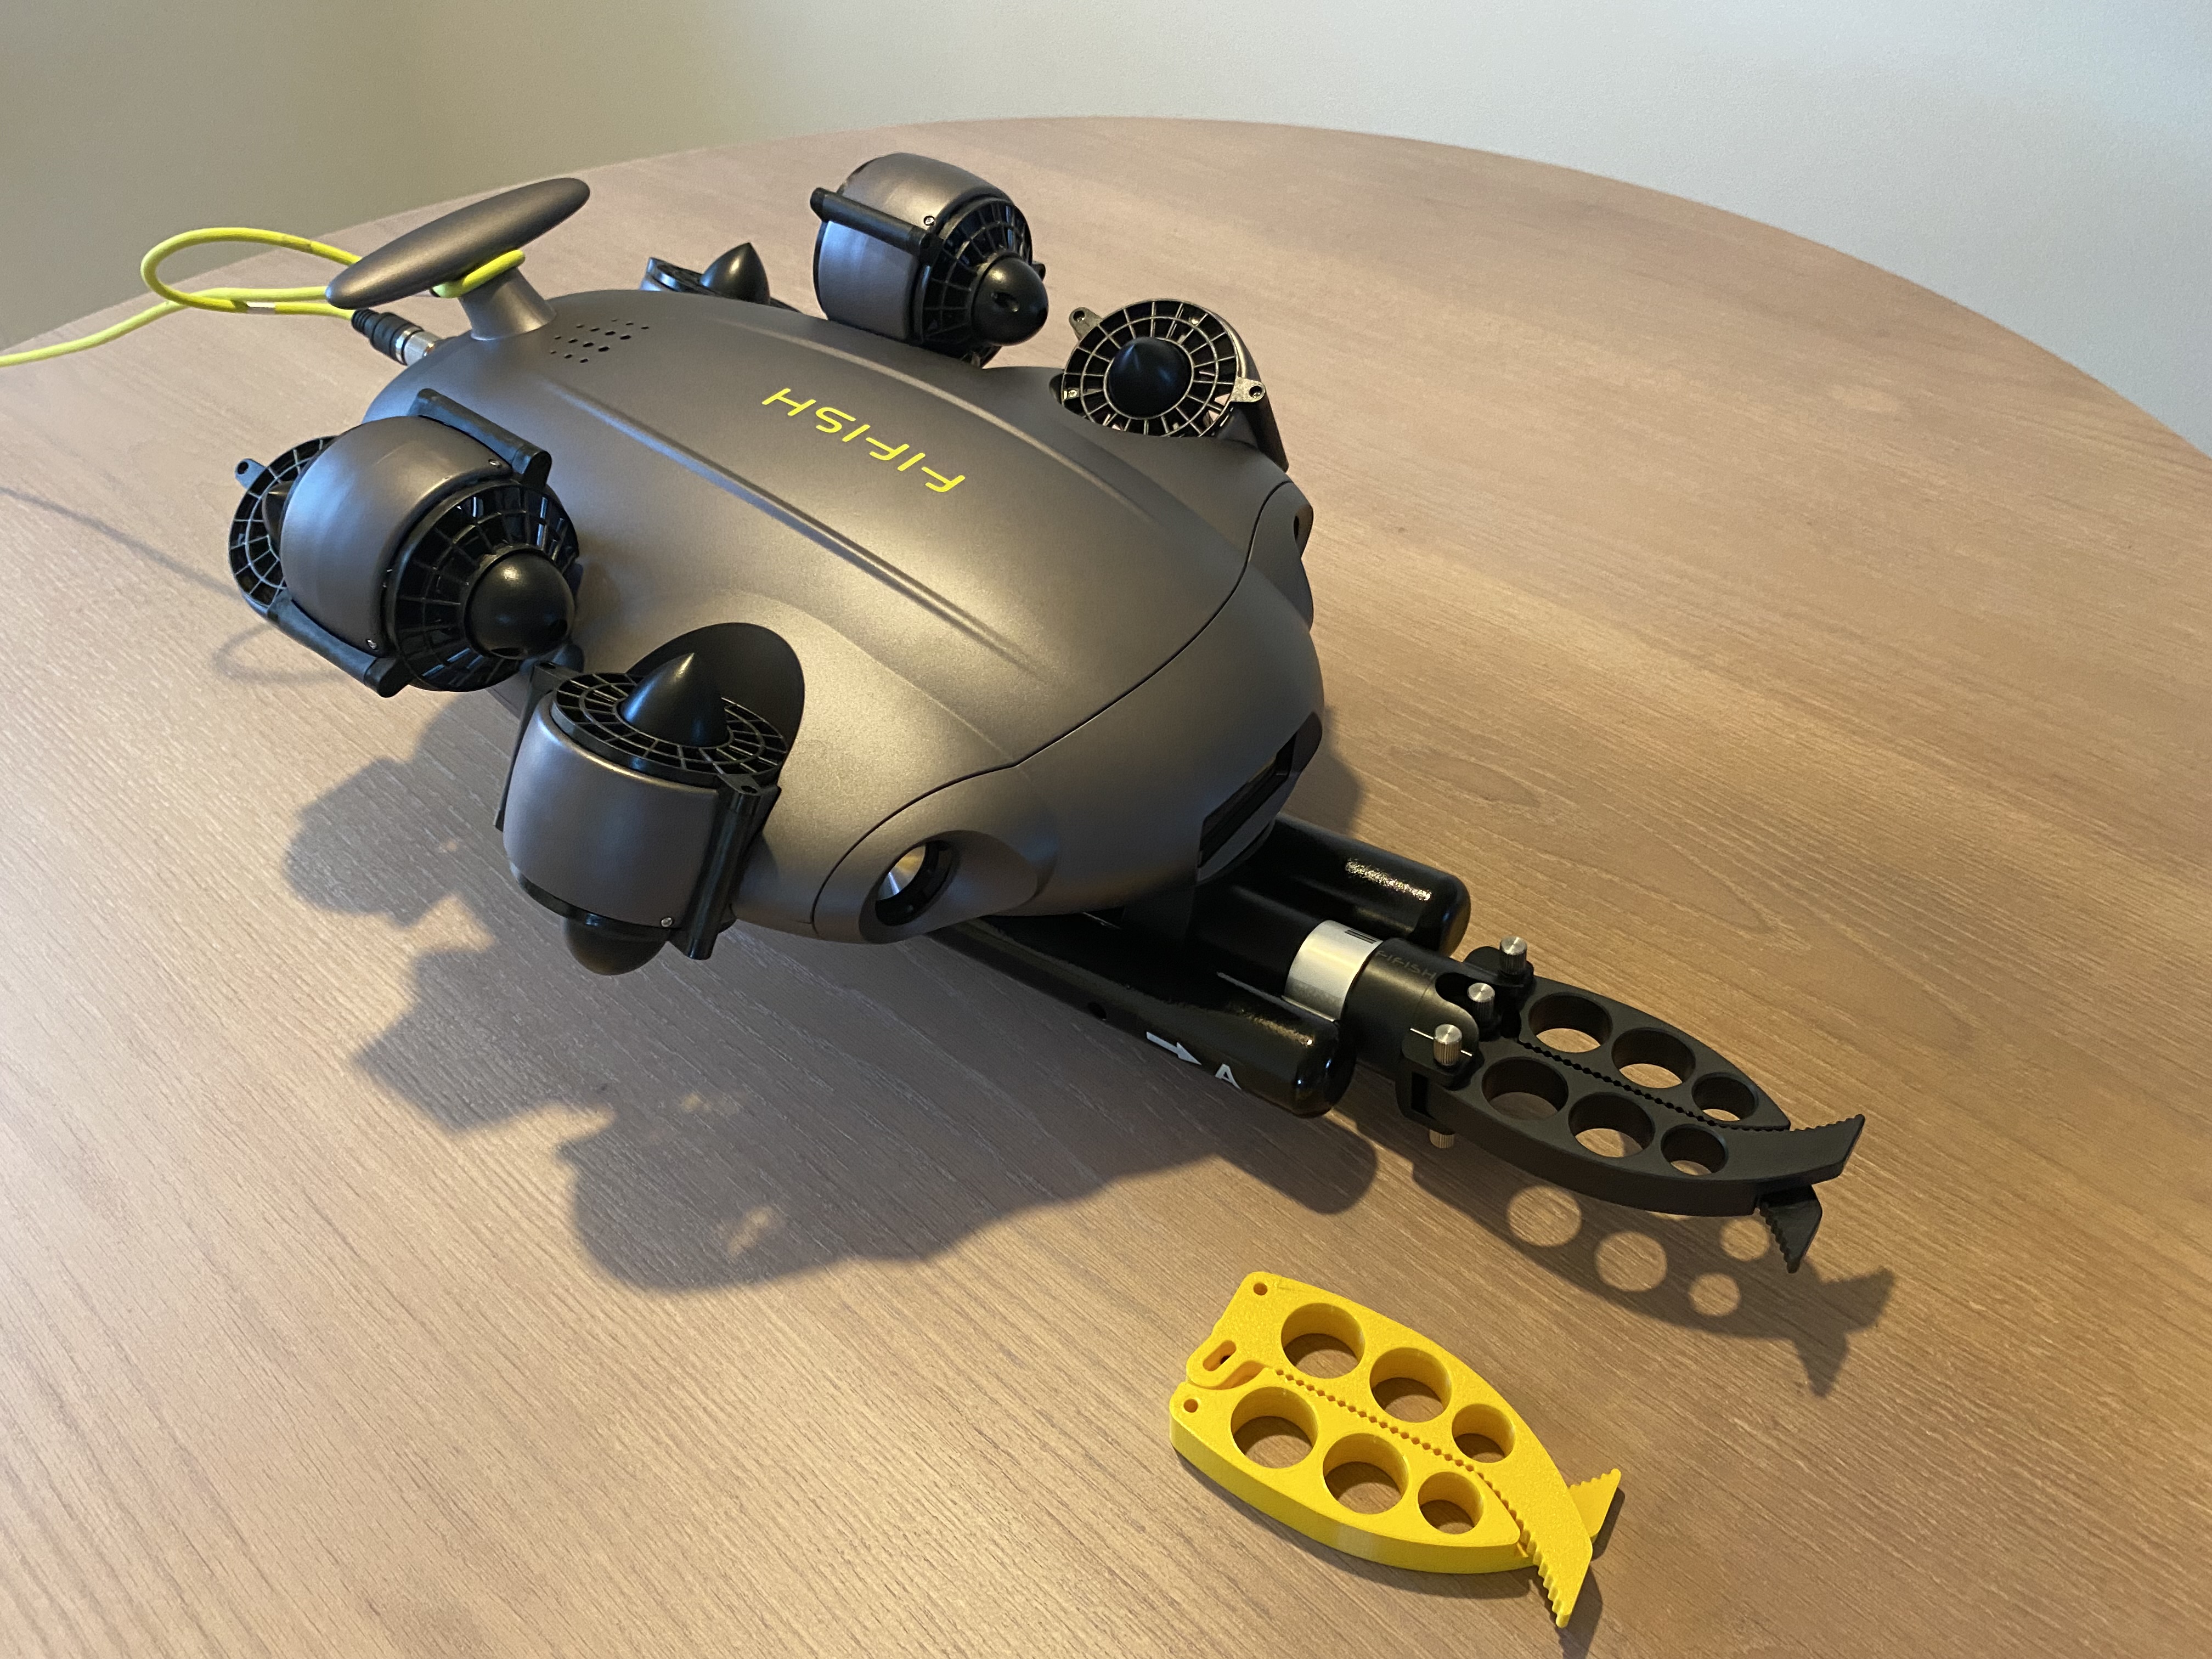 QYSEA FIFISH V6 Claw for Robotic Arm